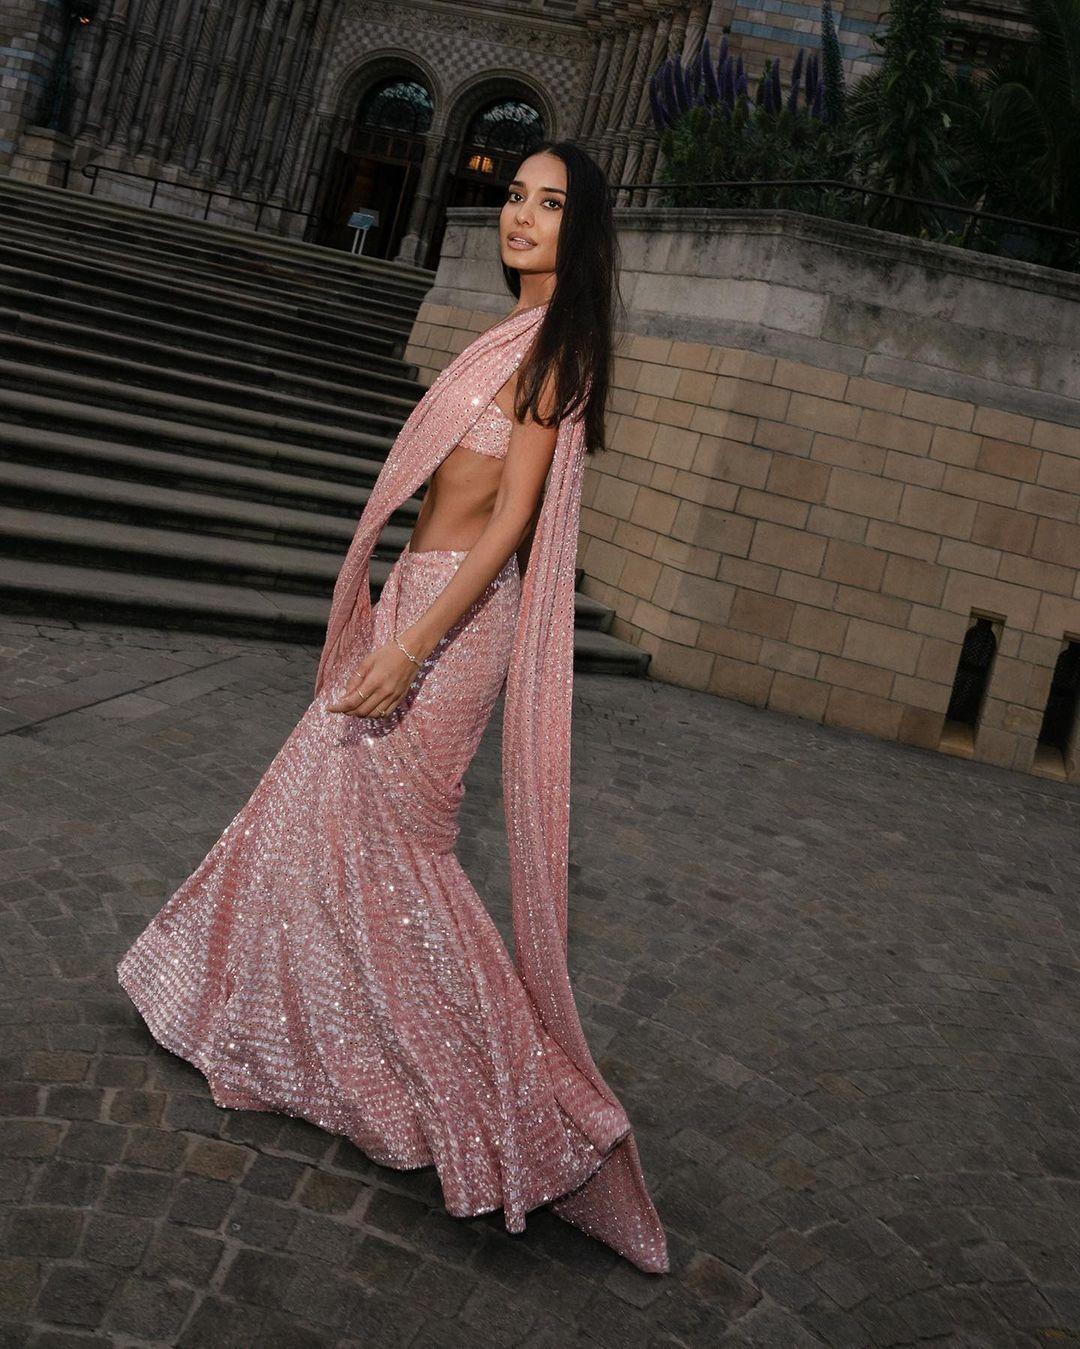 Mesmerizing in pink: Lisa Haydon shines in a saree adorned with glittery embellishments, paired with a strapless blouse by Arpita Mehta